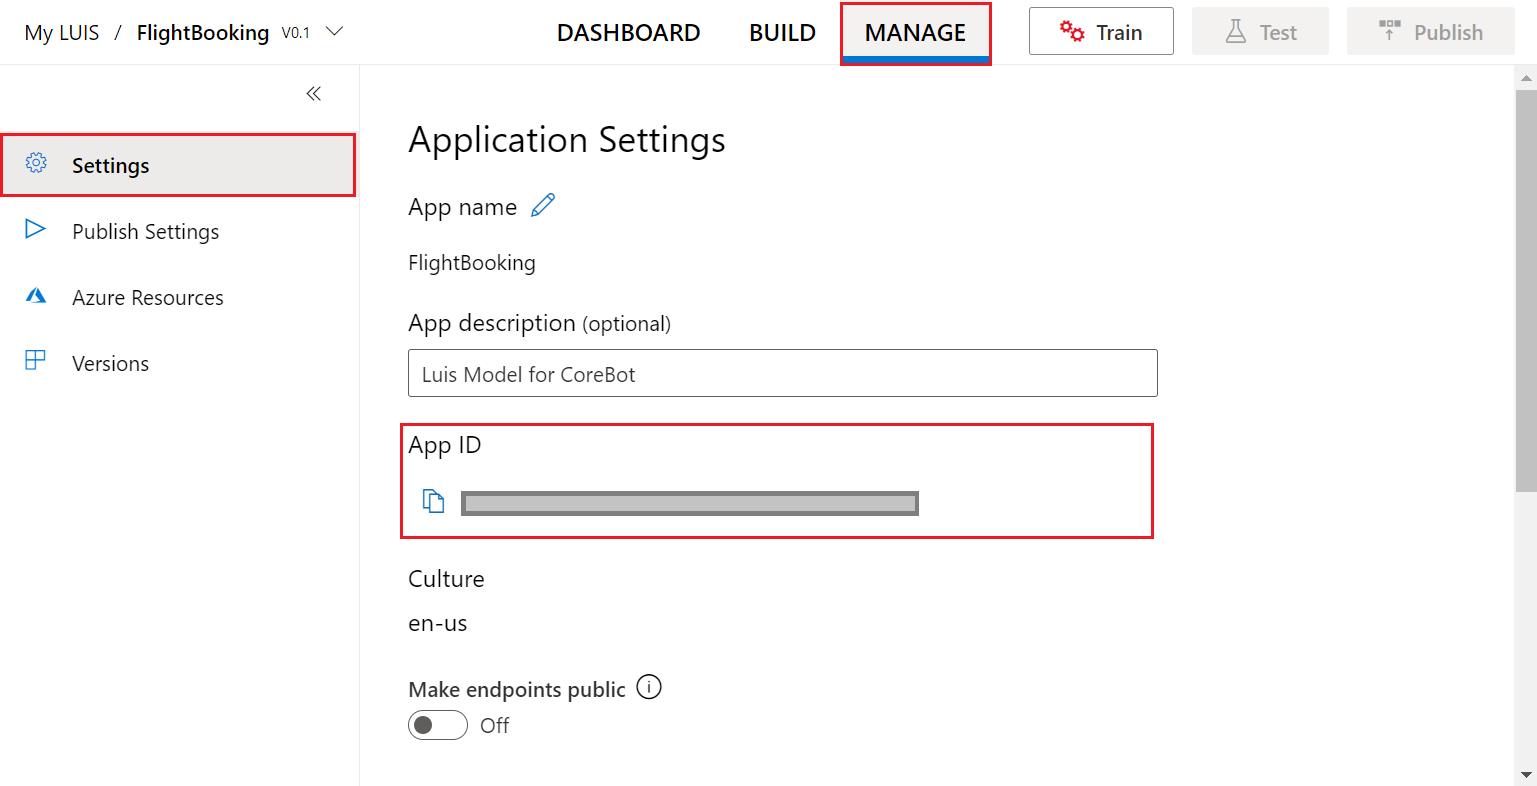 Manage LUIS application information